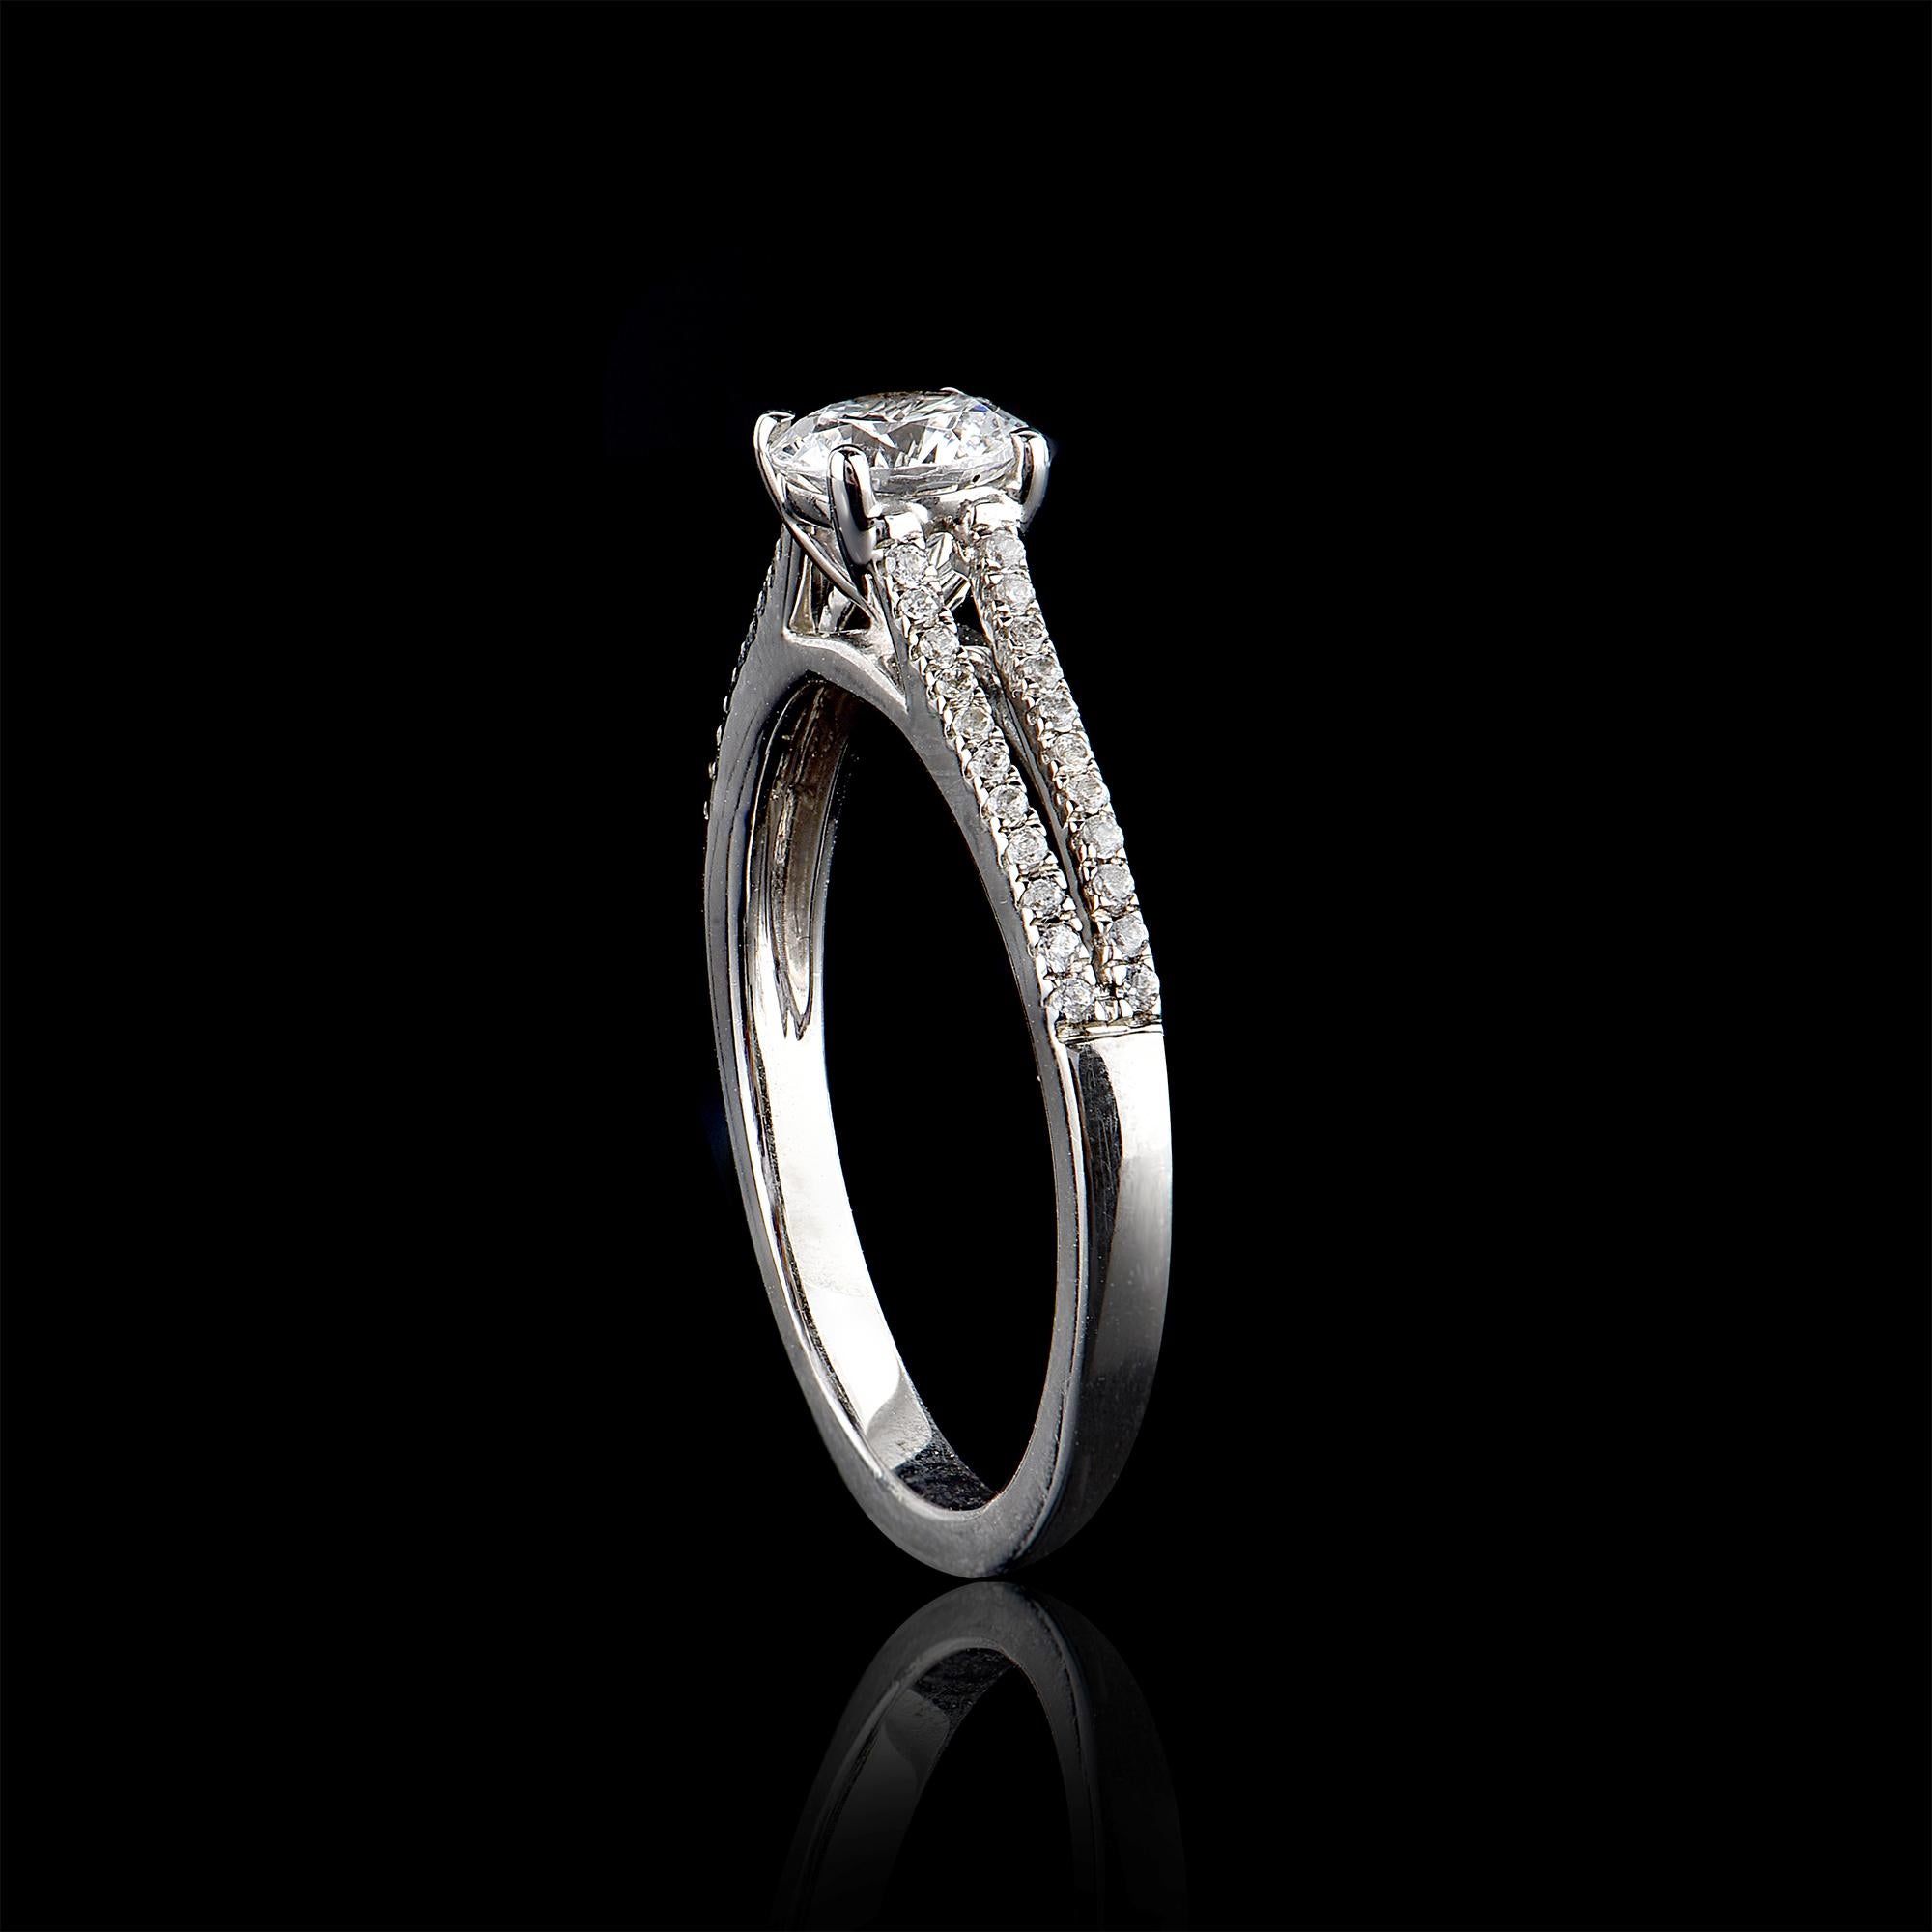 Give a touch of glamour to your fine jewelry collection with this diamond petal engagement ring. It features 0.60 ct centre stone and 0.15 ct round brilliant diamond on split shank set in micro pave and channel setting. The diamond are natural, not